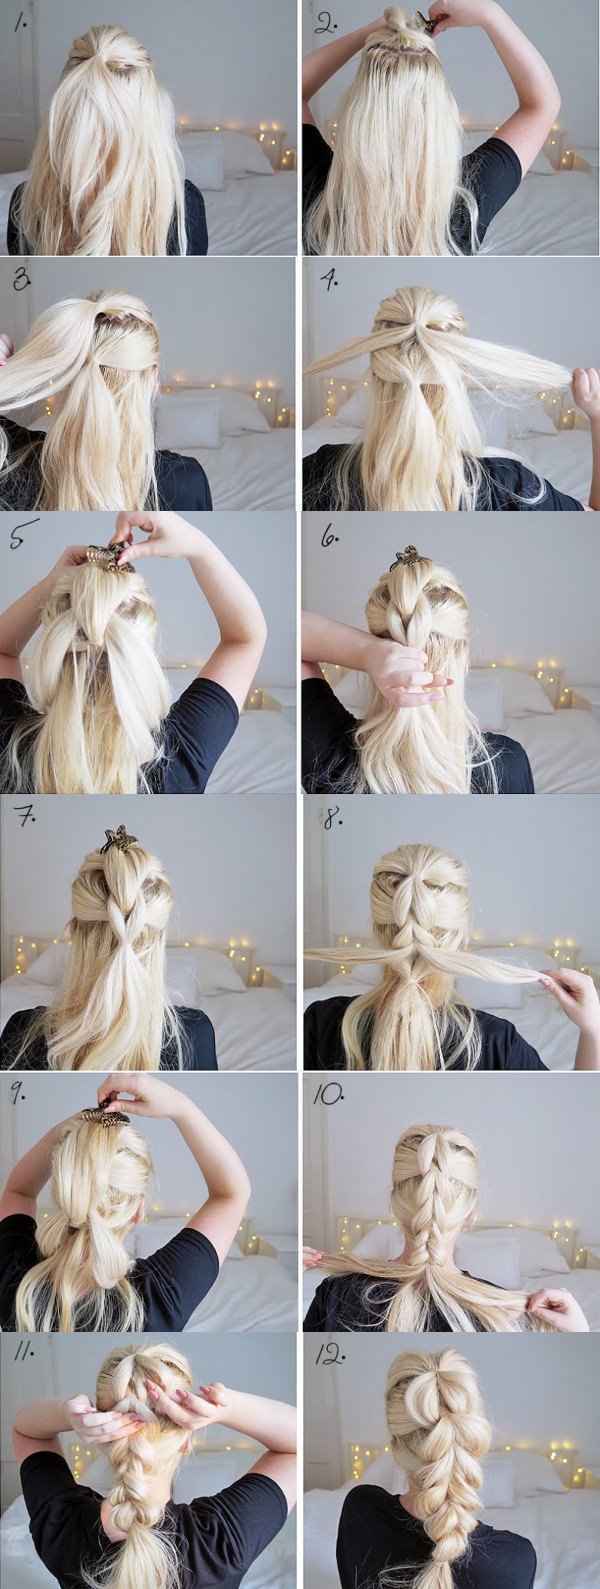 Try these Hairstyles that can be done in 3 minutes when you are running late or just don’t feel like putting in some efforts.